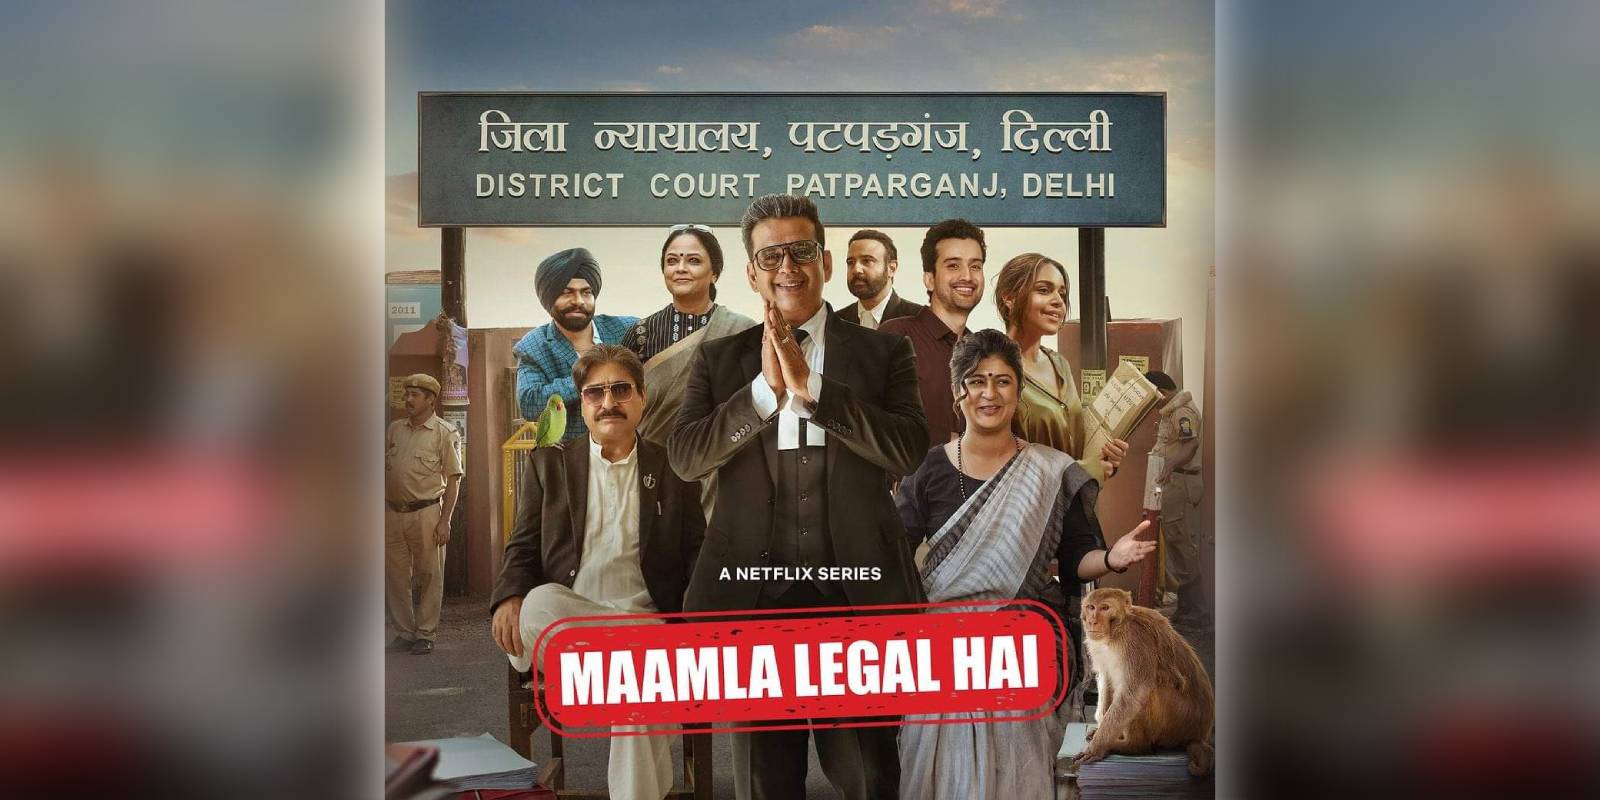 A poster of the series Maamla Legal Hai